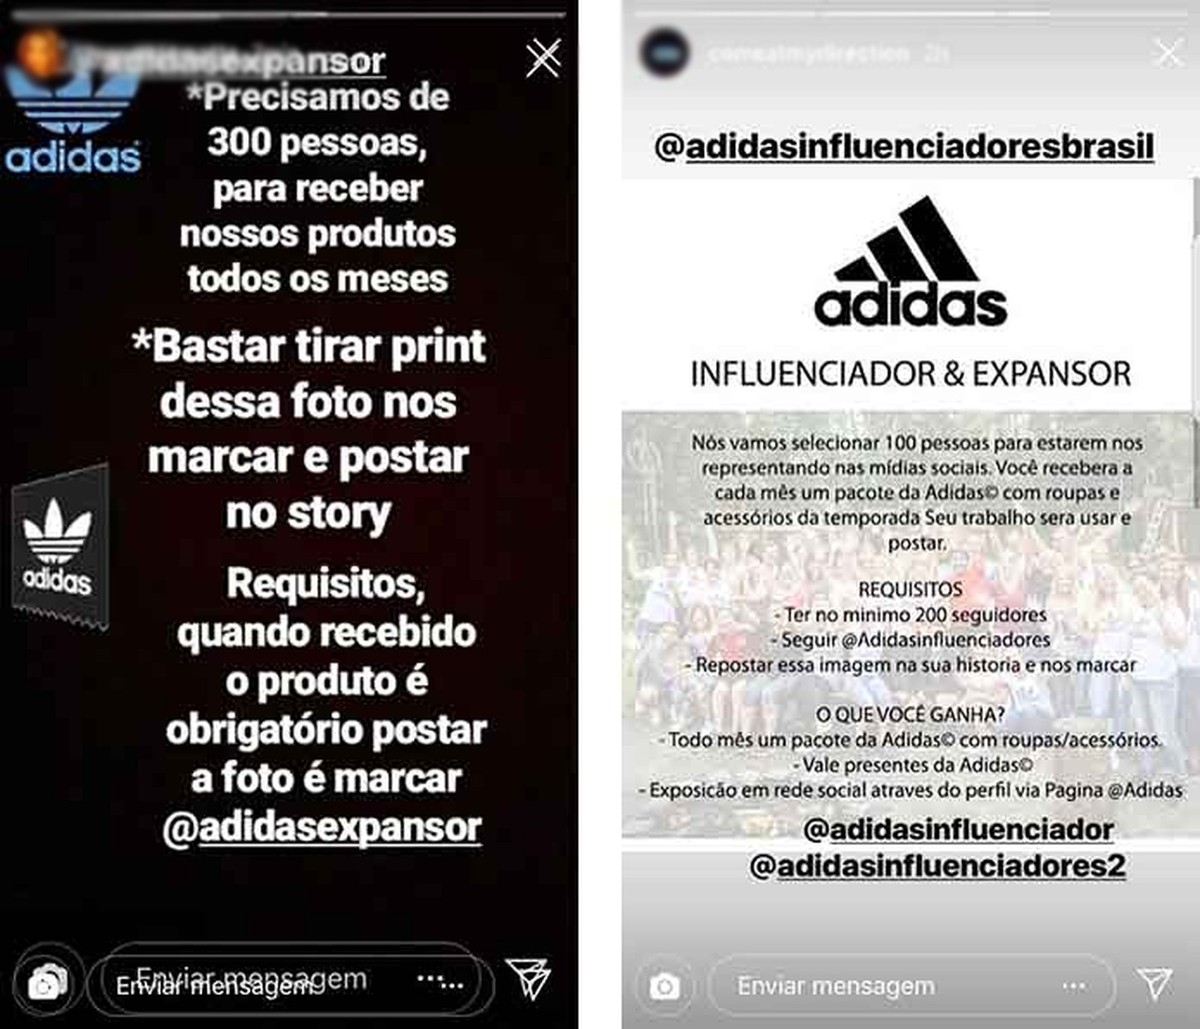 Adidas influencer: fake promotion circulates on social networks | Social networks